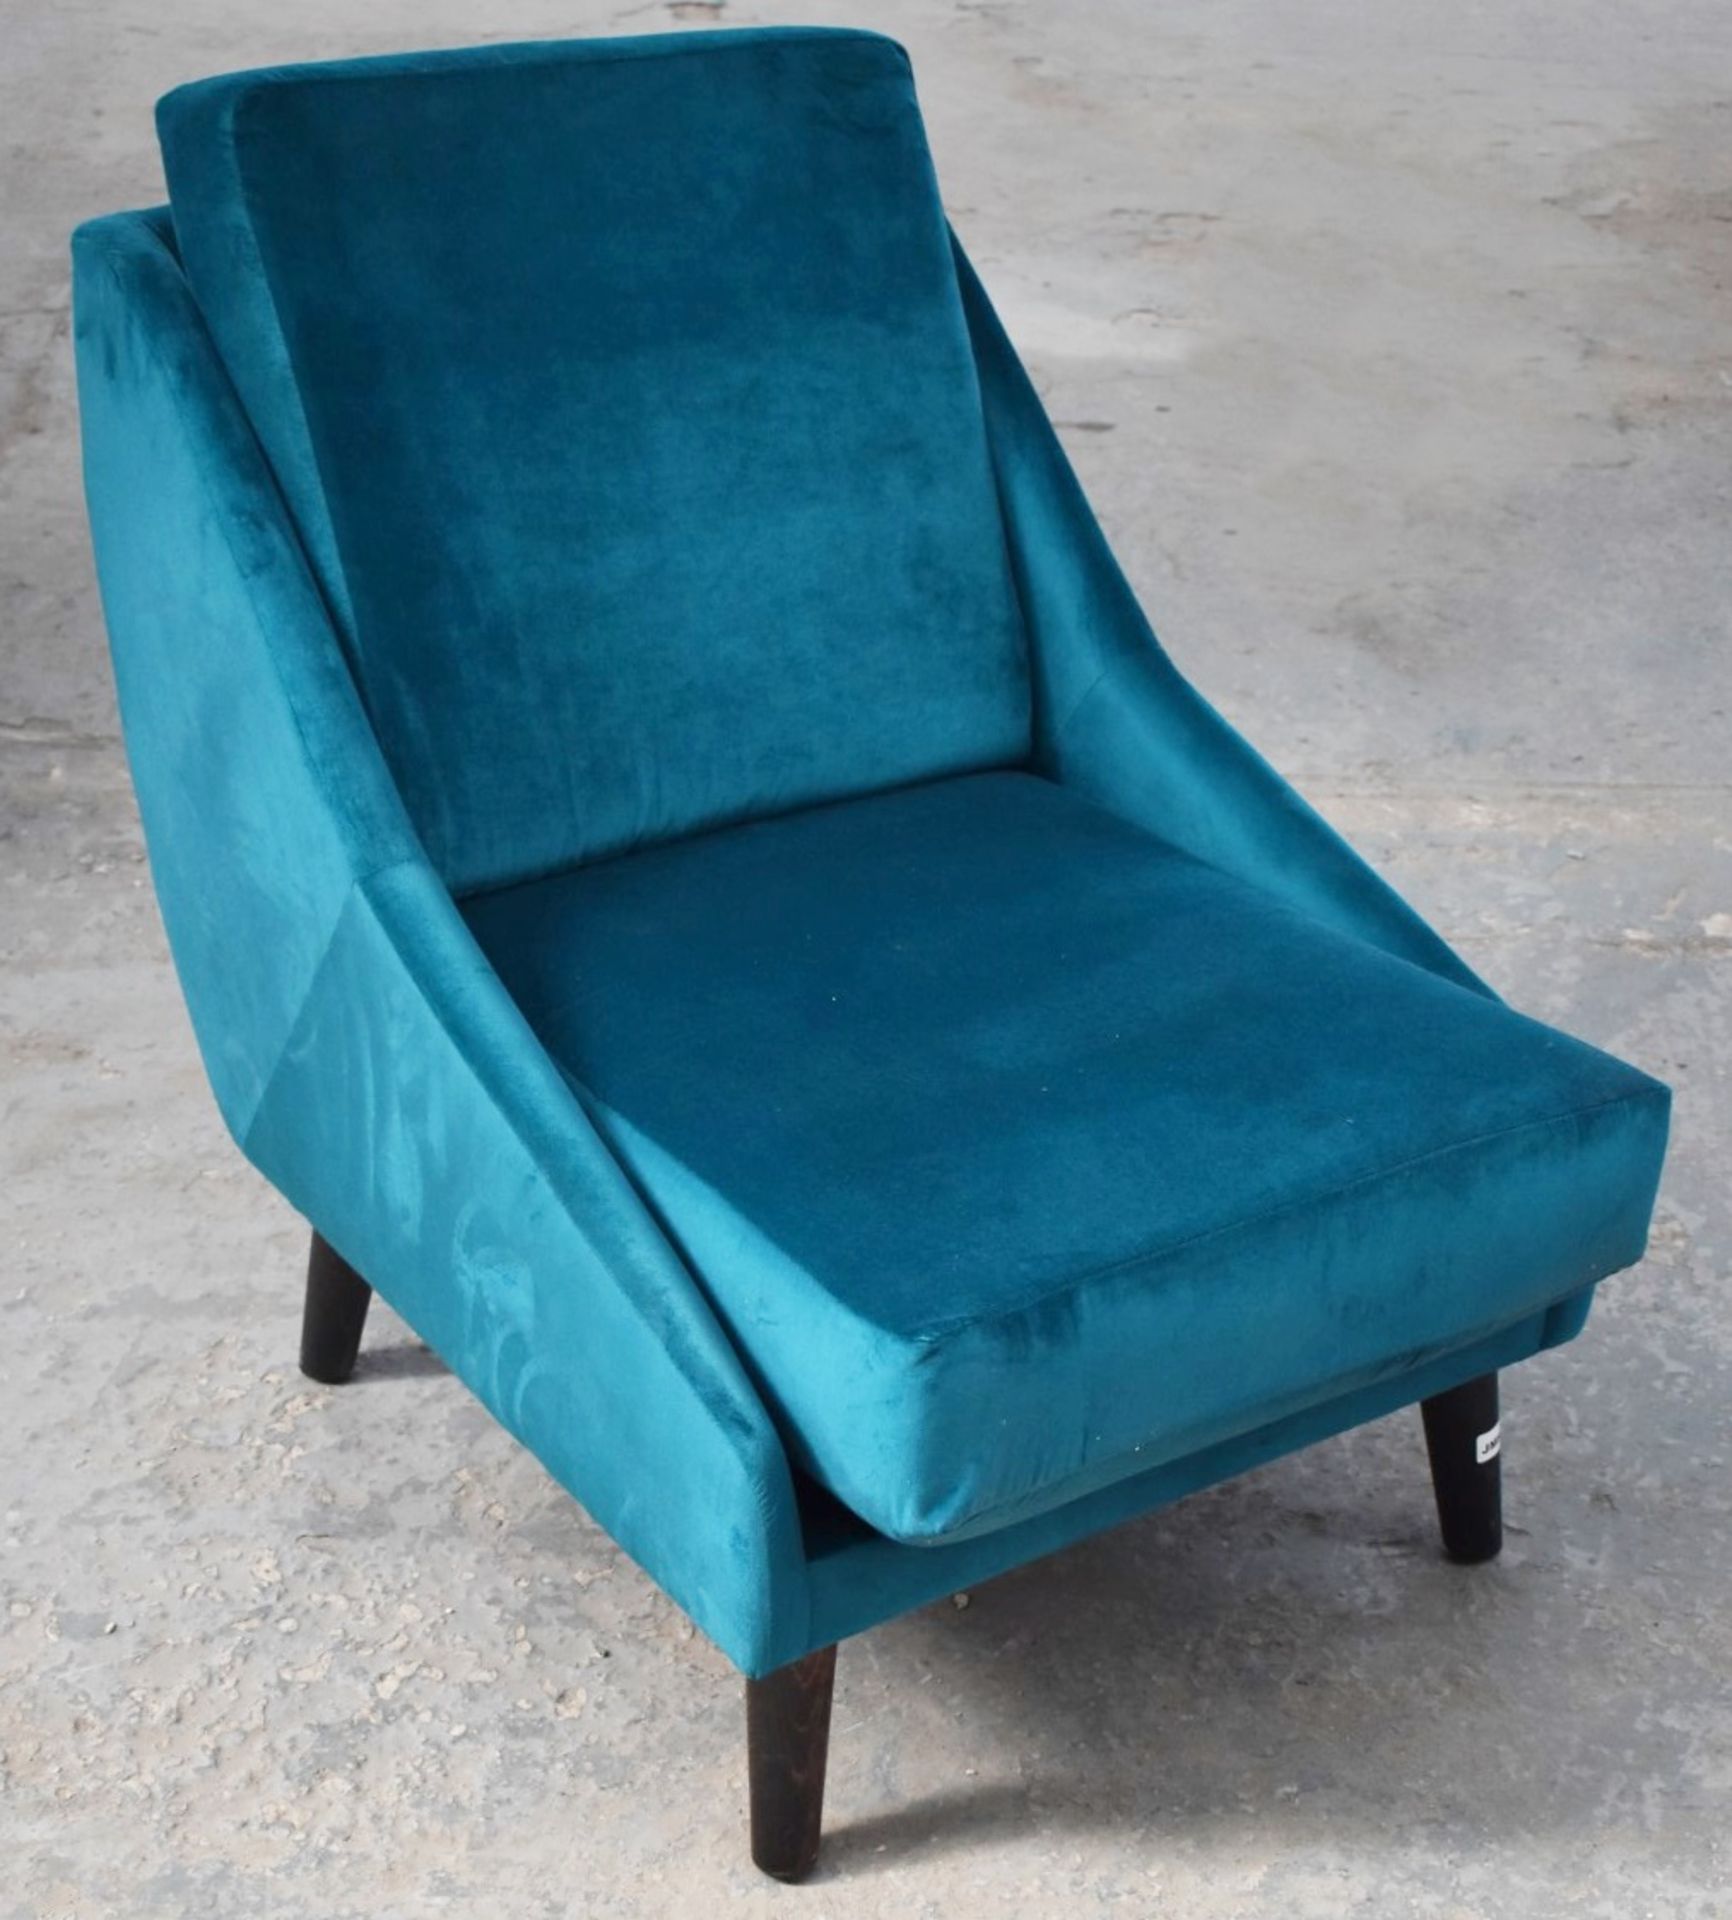 1 x Contemporary Commercial Armchair, Upholstered In A Premium Deep Teal Chenille - Ref: JMS206 -